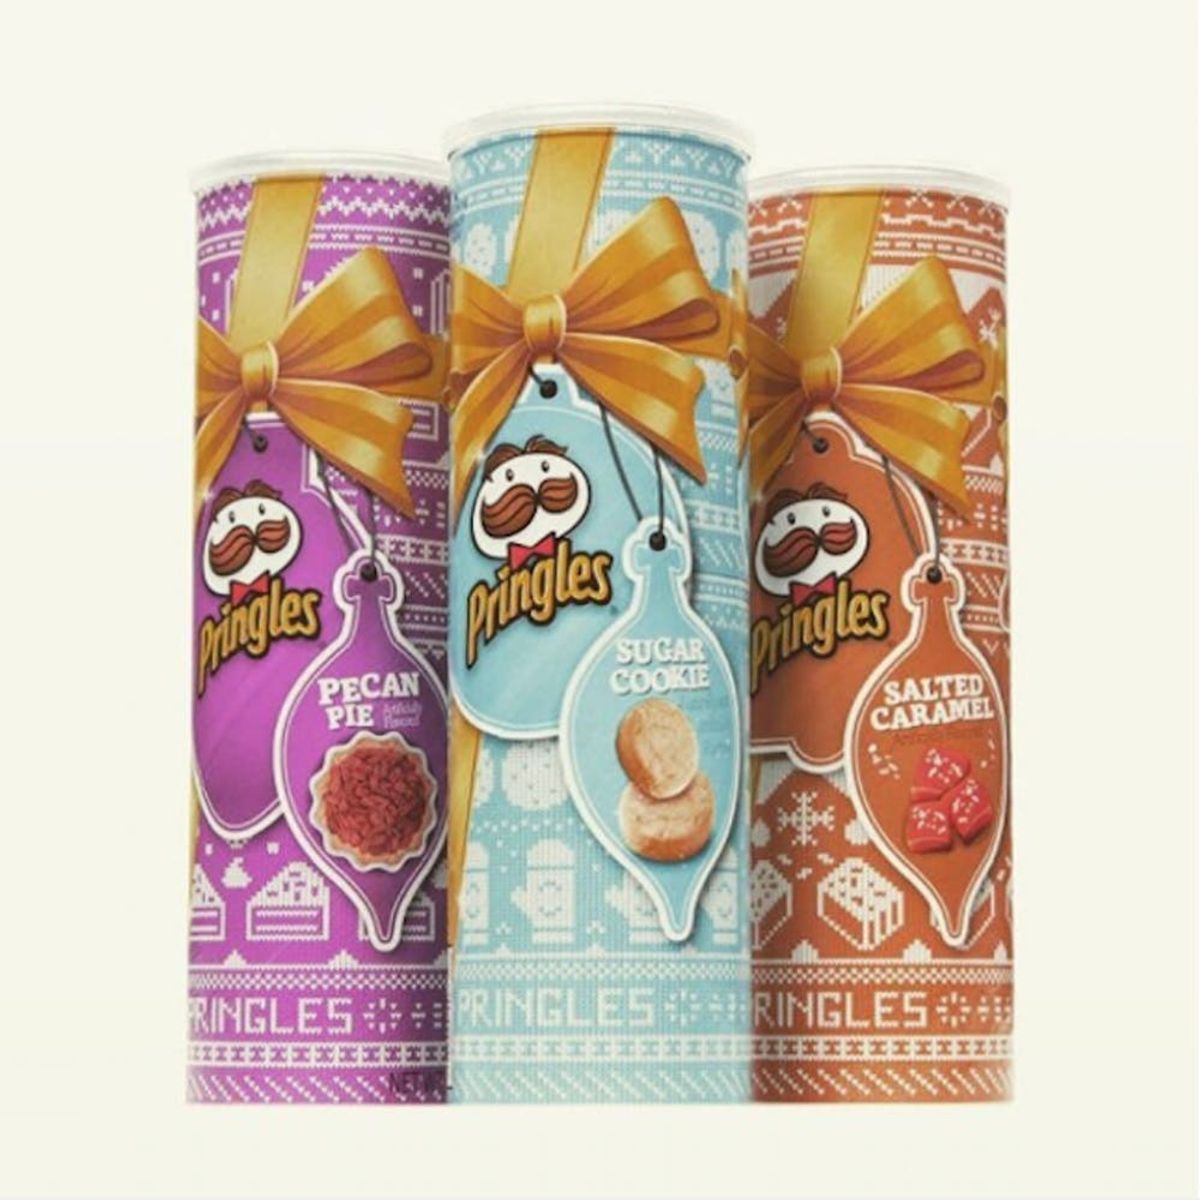 9 Pringles Holiday Flavors Ranked from Weirdest to Yummiest